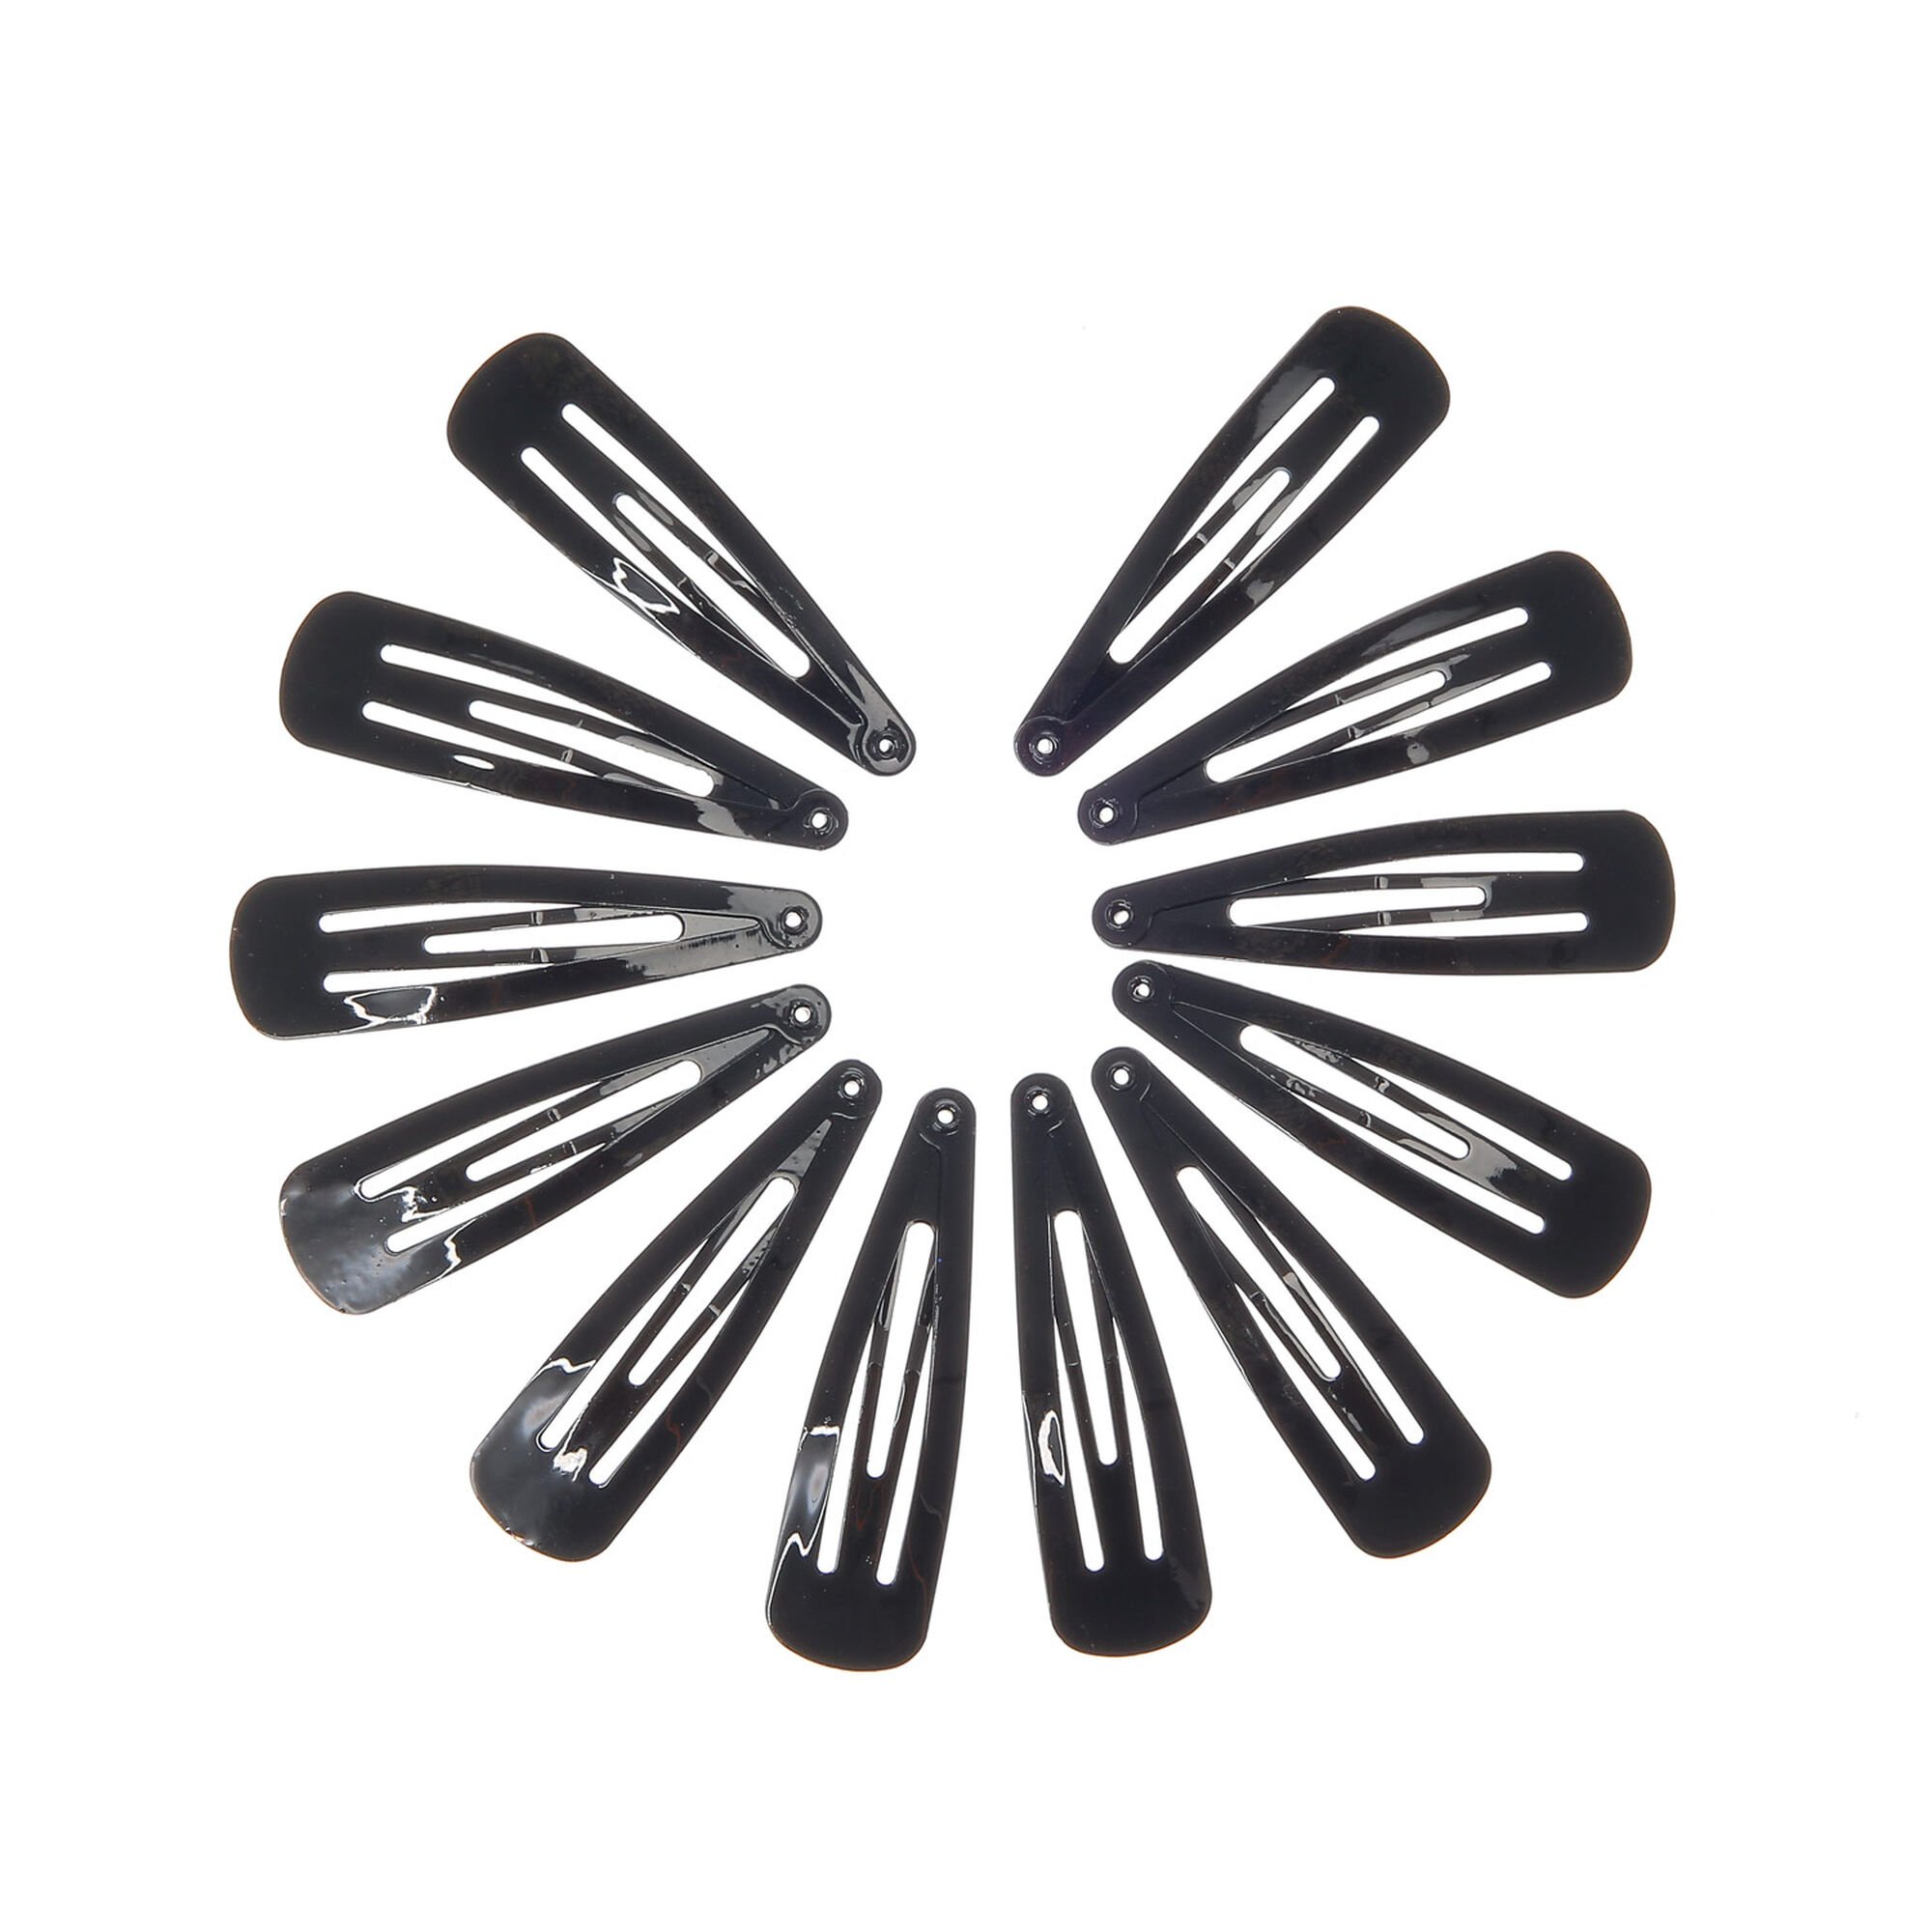 Barrettes Hair Clips Classic Simple Black And White Accessories For Women Girls